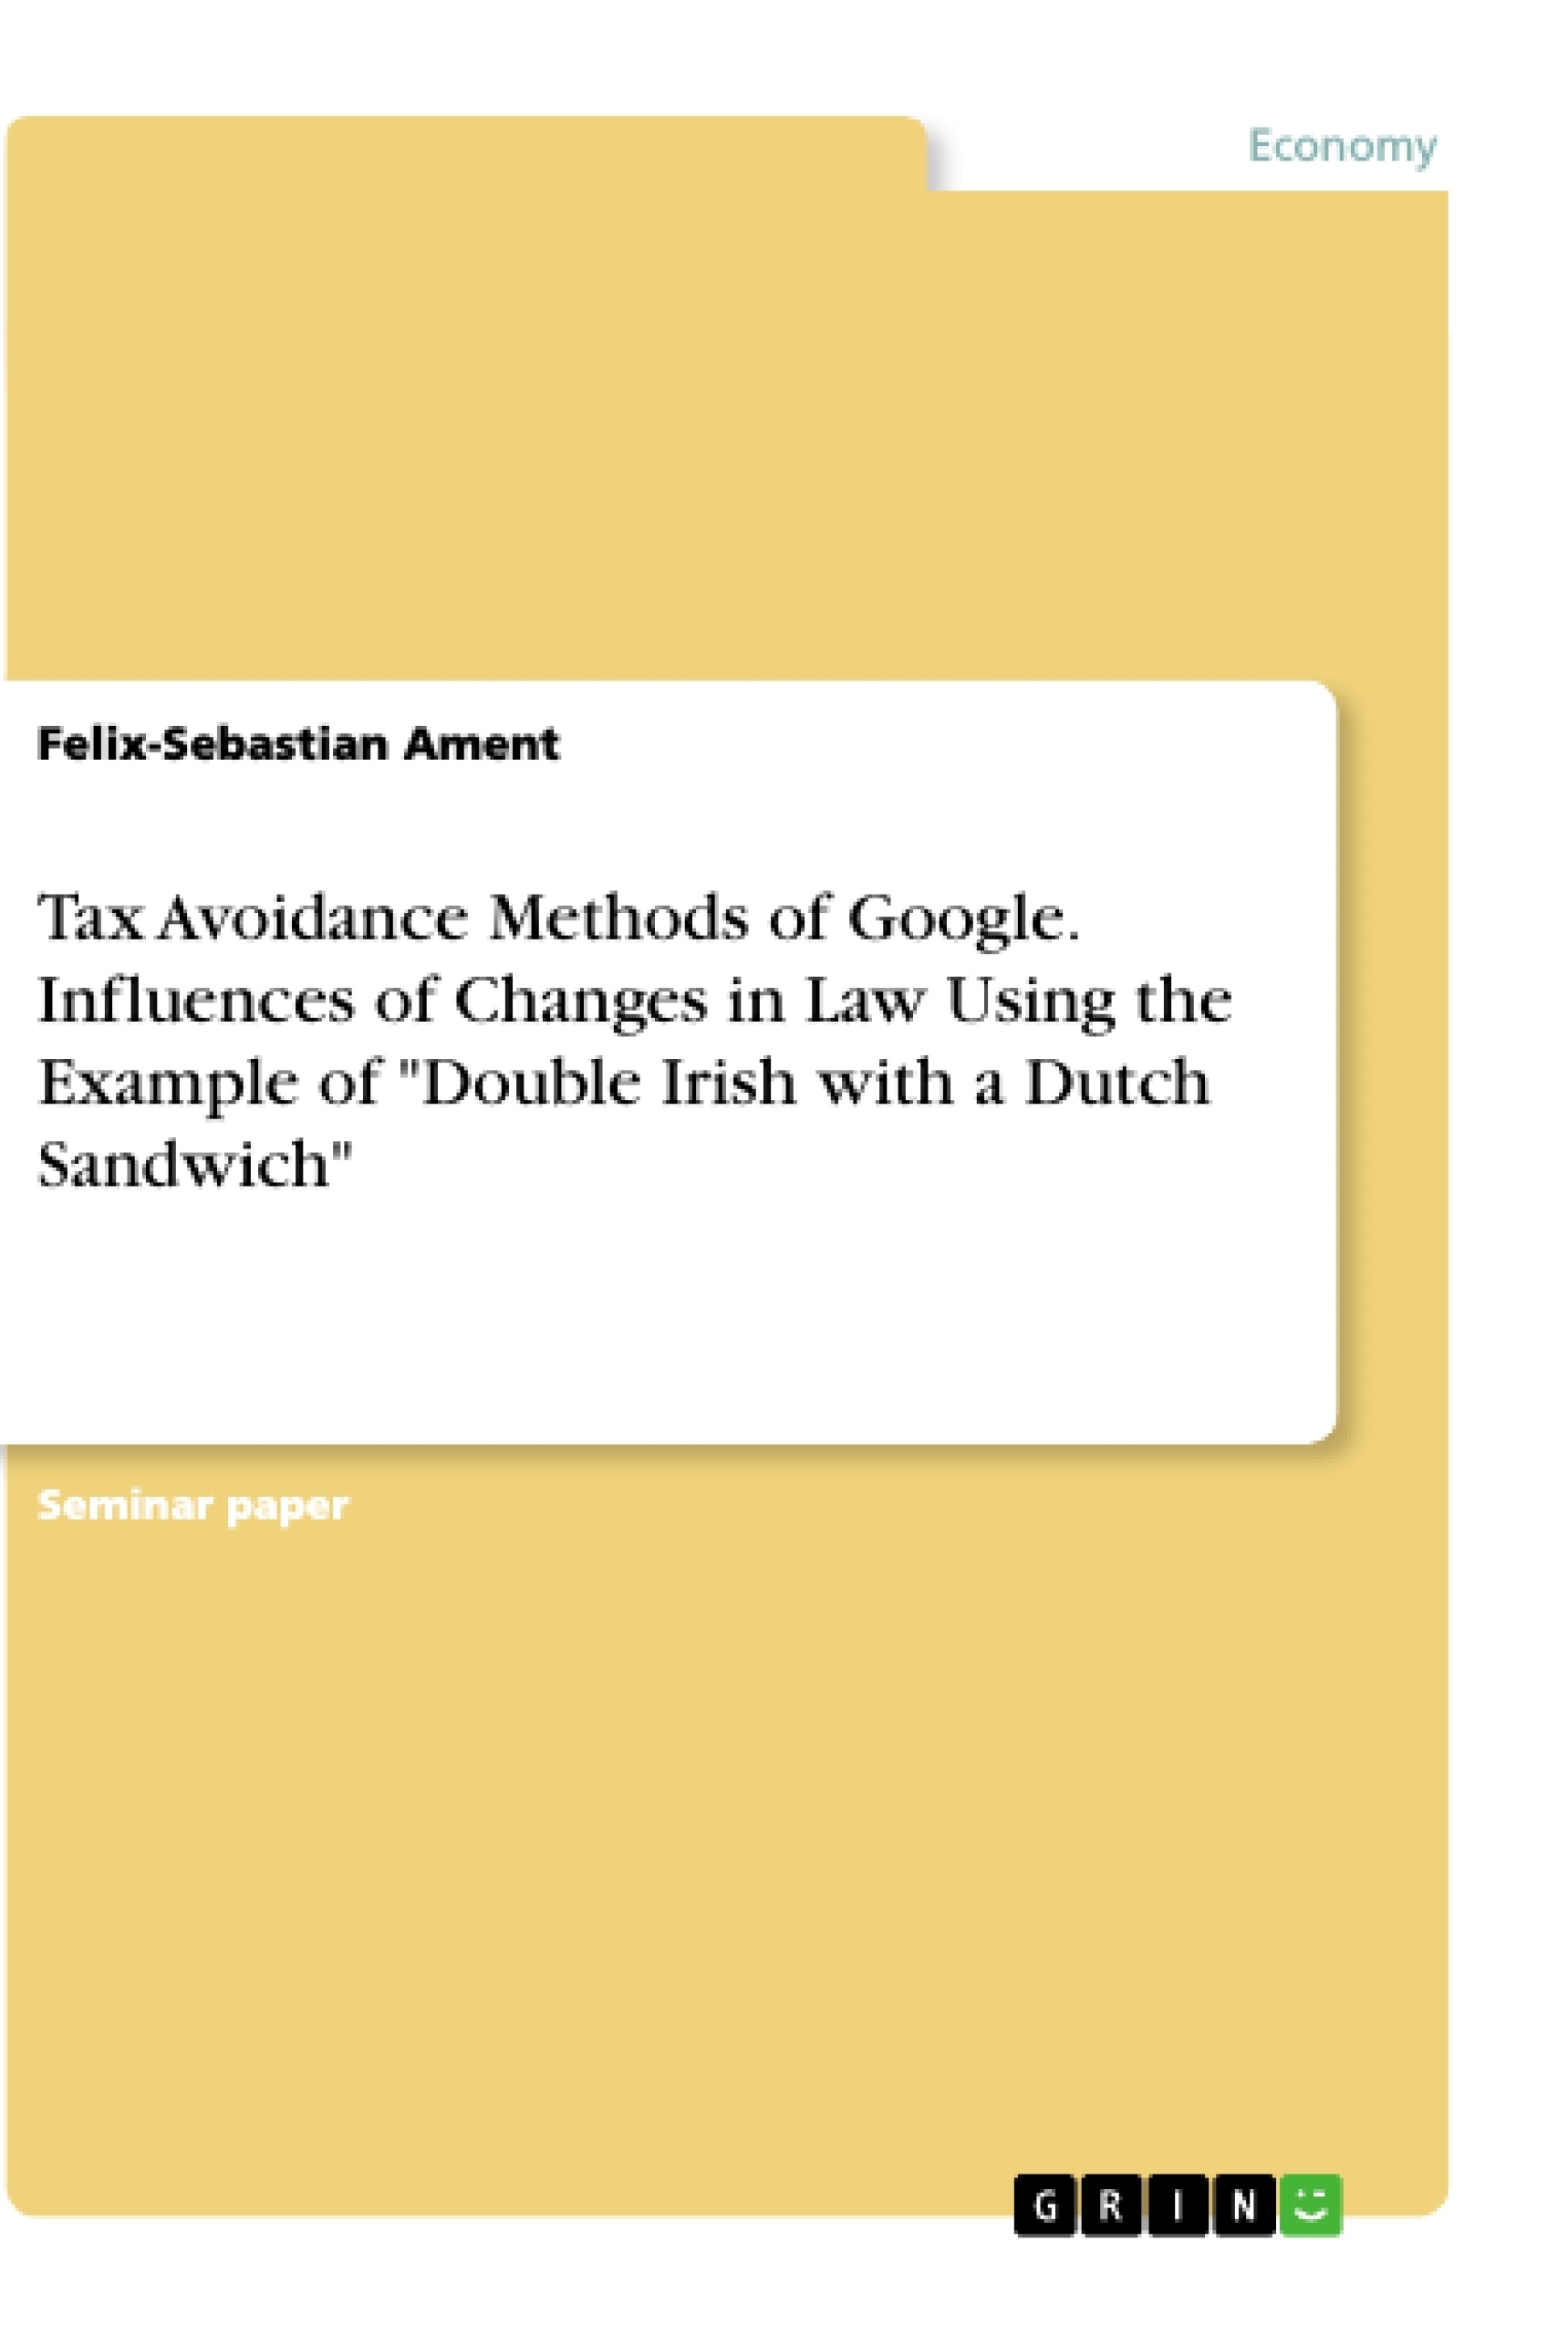 Title: Tax Avoidance Methods of Google. Influences of Changes in Law Using the Example of "Double Irish with a Dutch Sandwich"